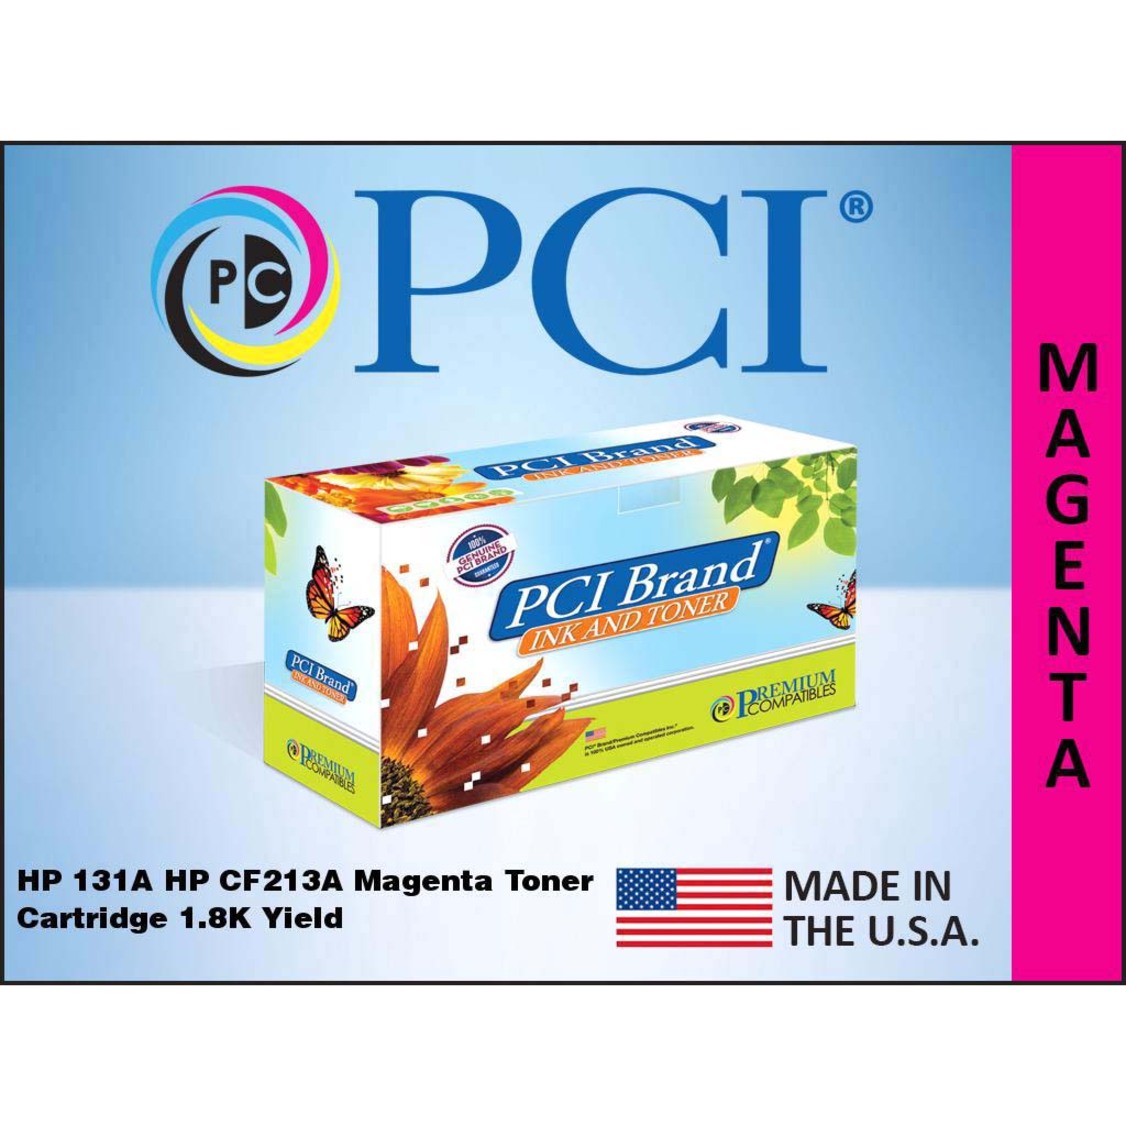 Premium Compatibles CF213A-PCI HP 131A Magenta Toner Cartridge 1.8K Yield Made in the USA